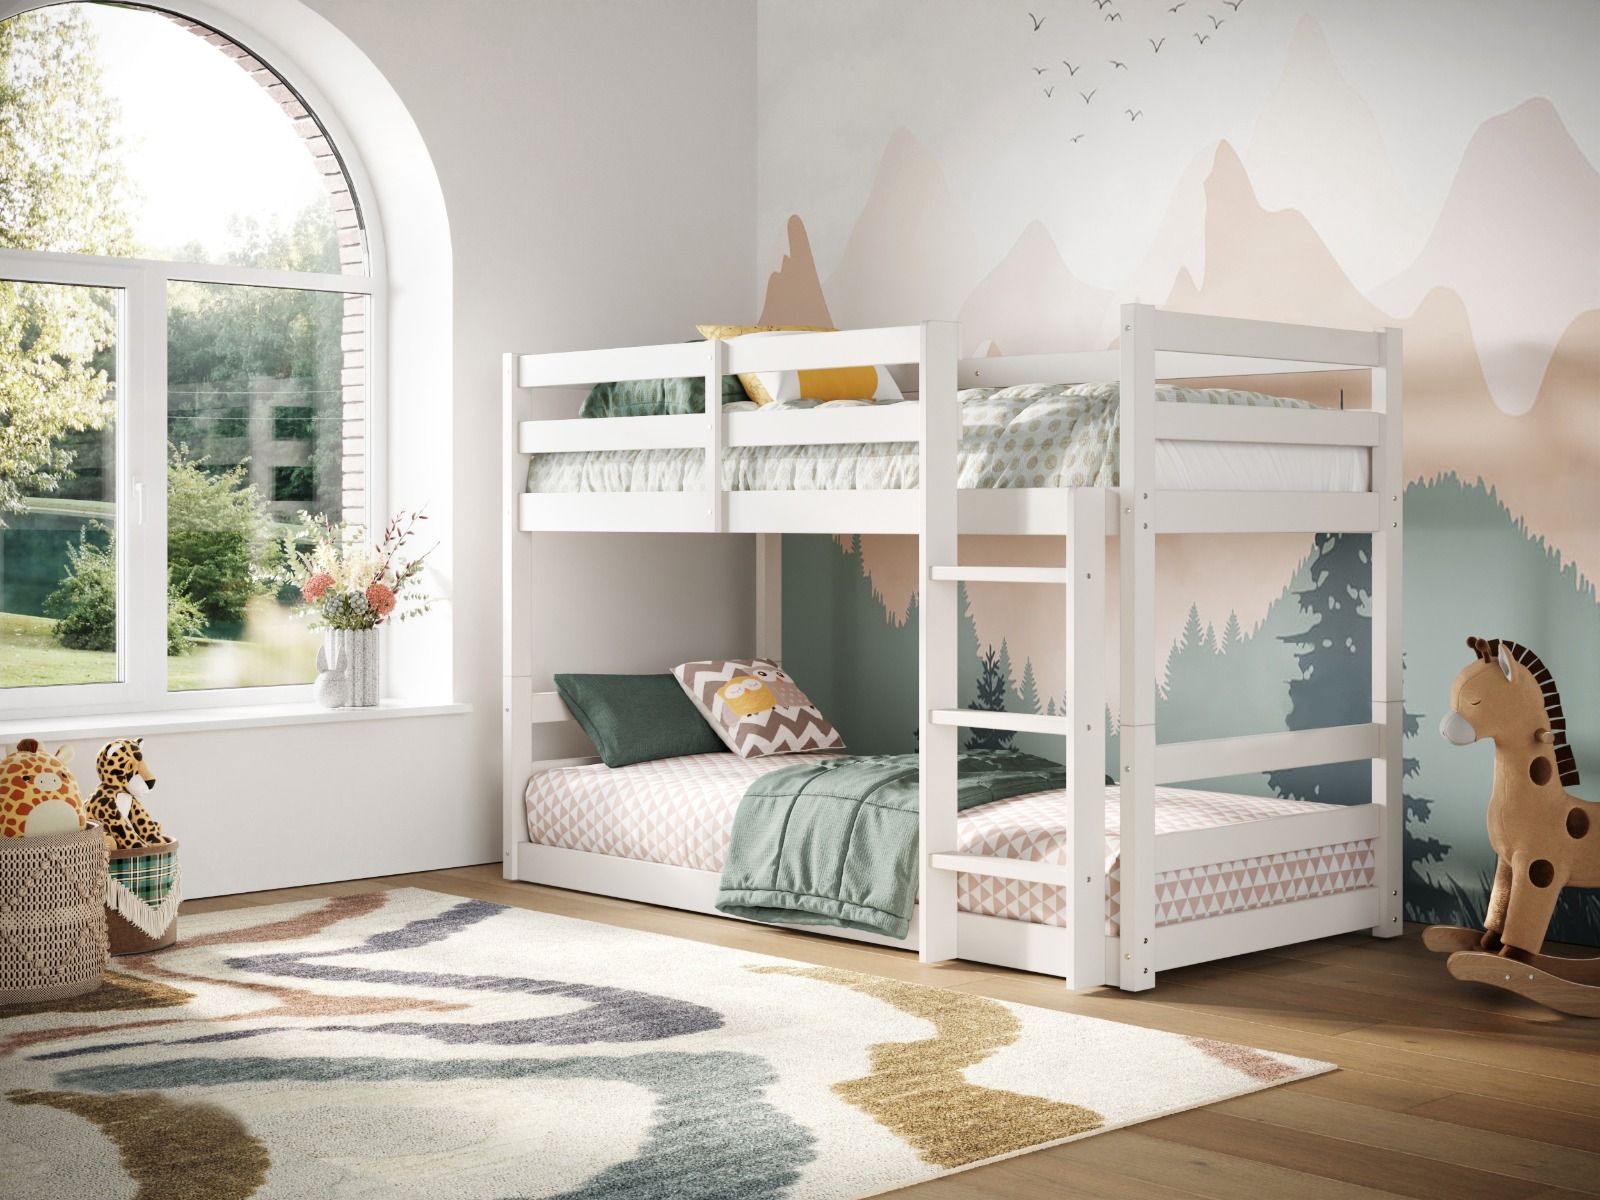 Flair Shasha Low Shorty Wooden Bunk Bed - White